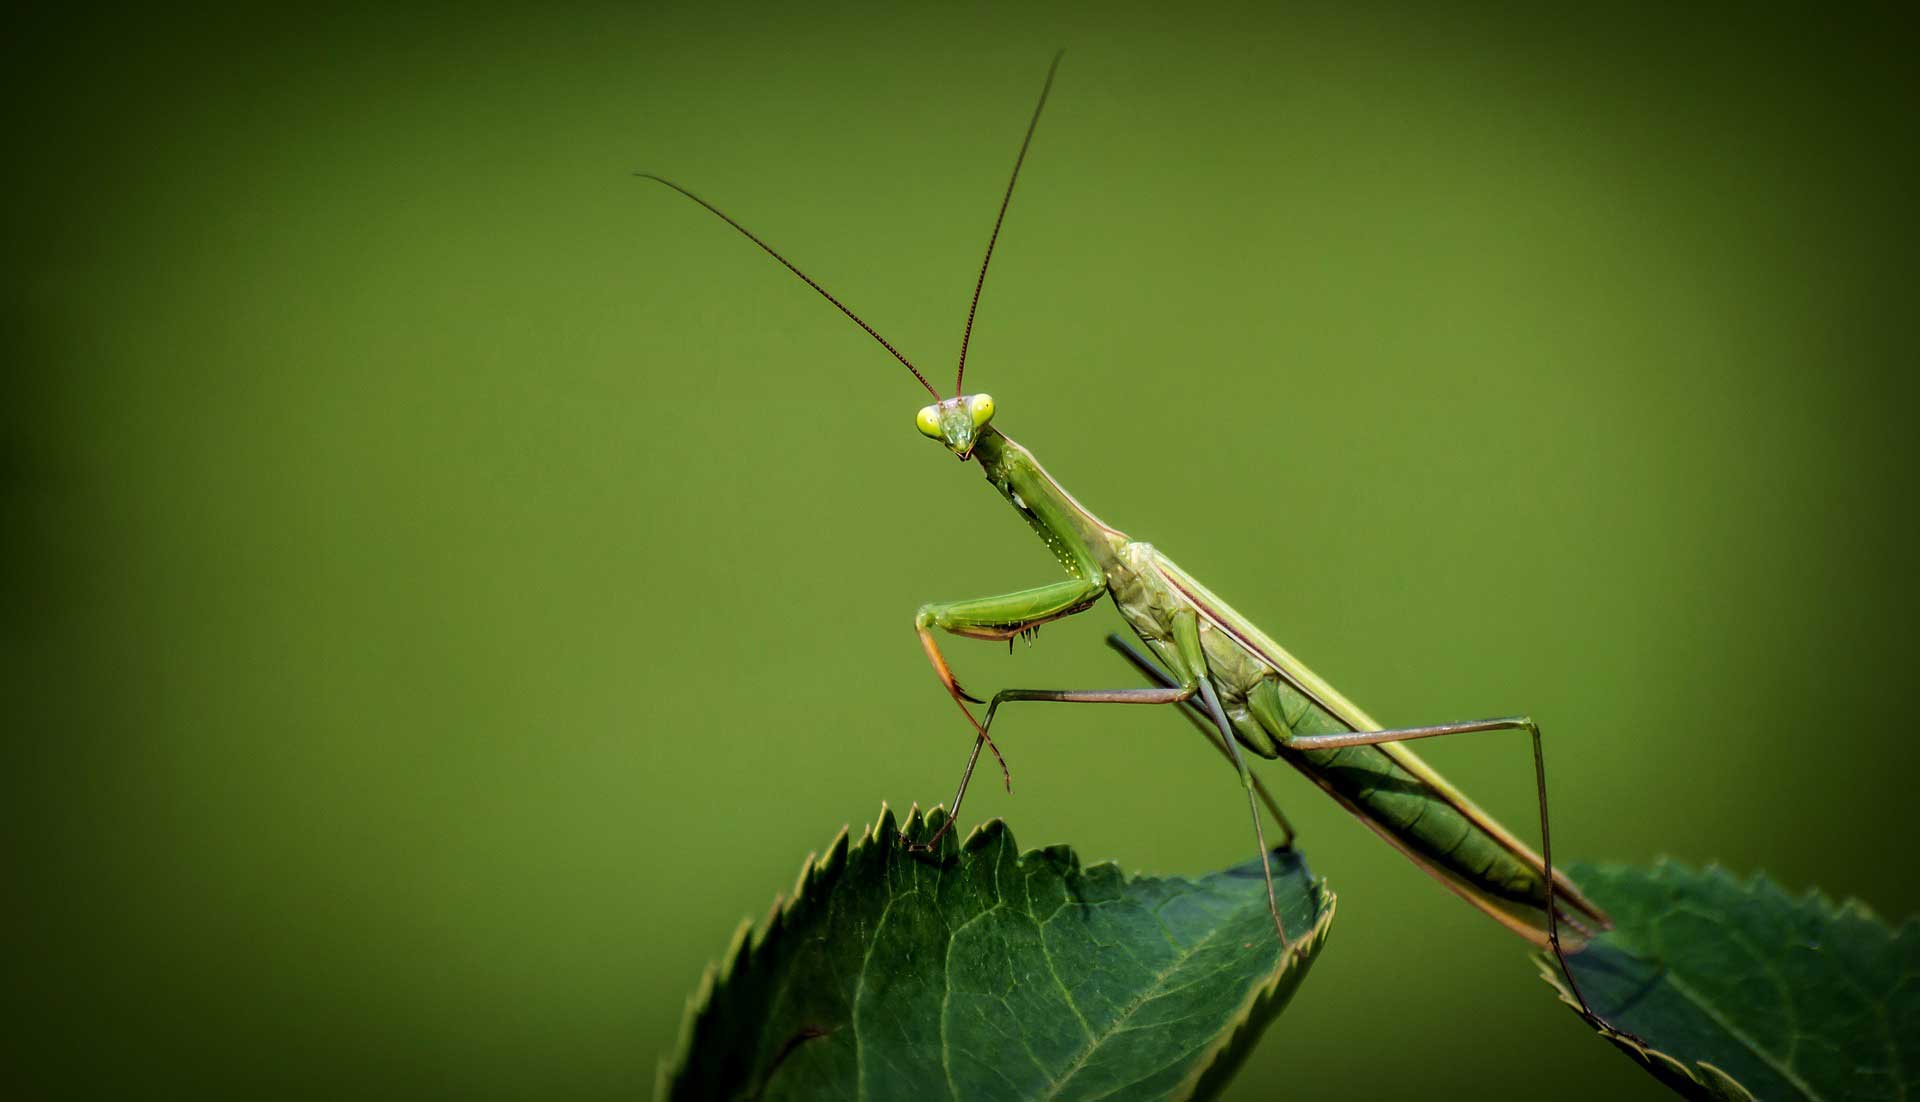 Where to Find Live Praying Mantis? - Learn About Nature